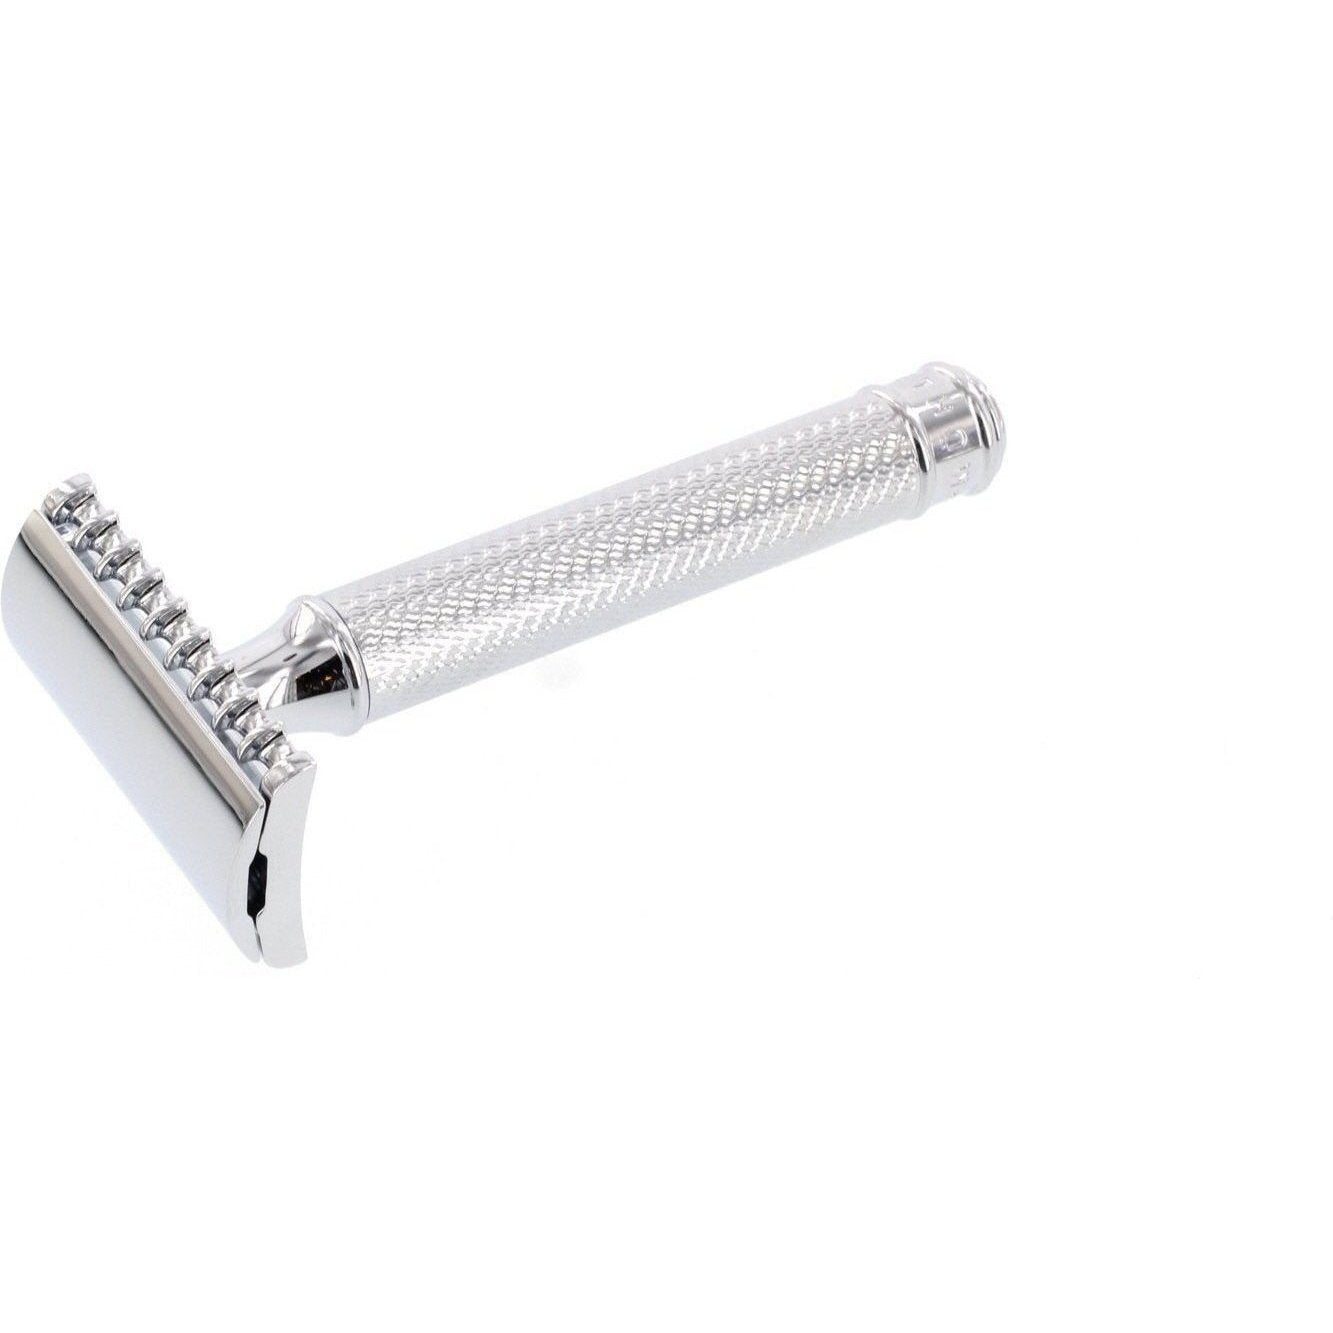 A Mühle R41 Open Comb Safety Razor from KirbyAllison.com on a white background providing a close shave.